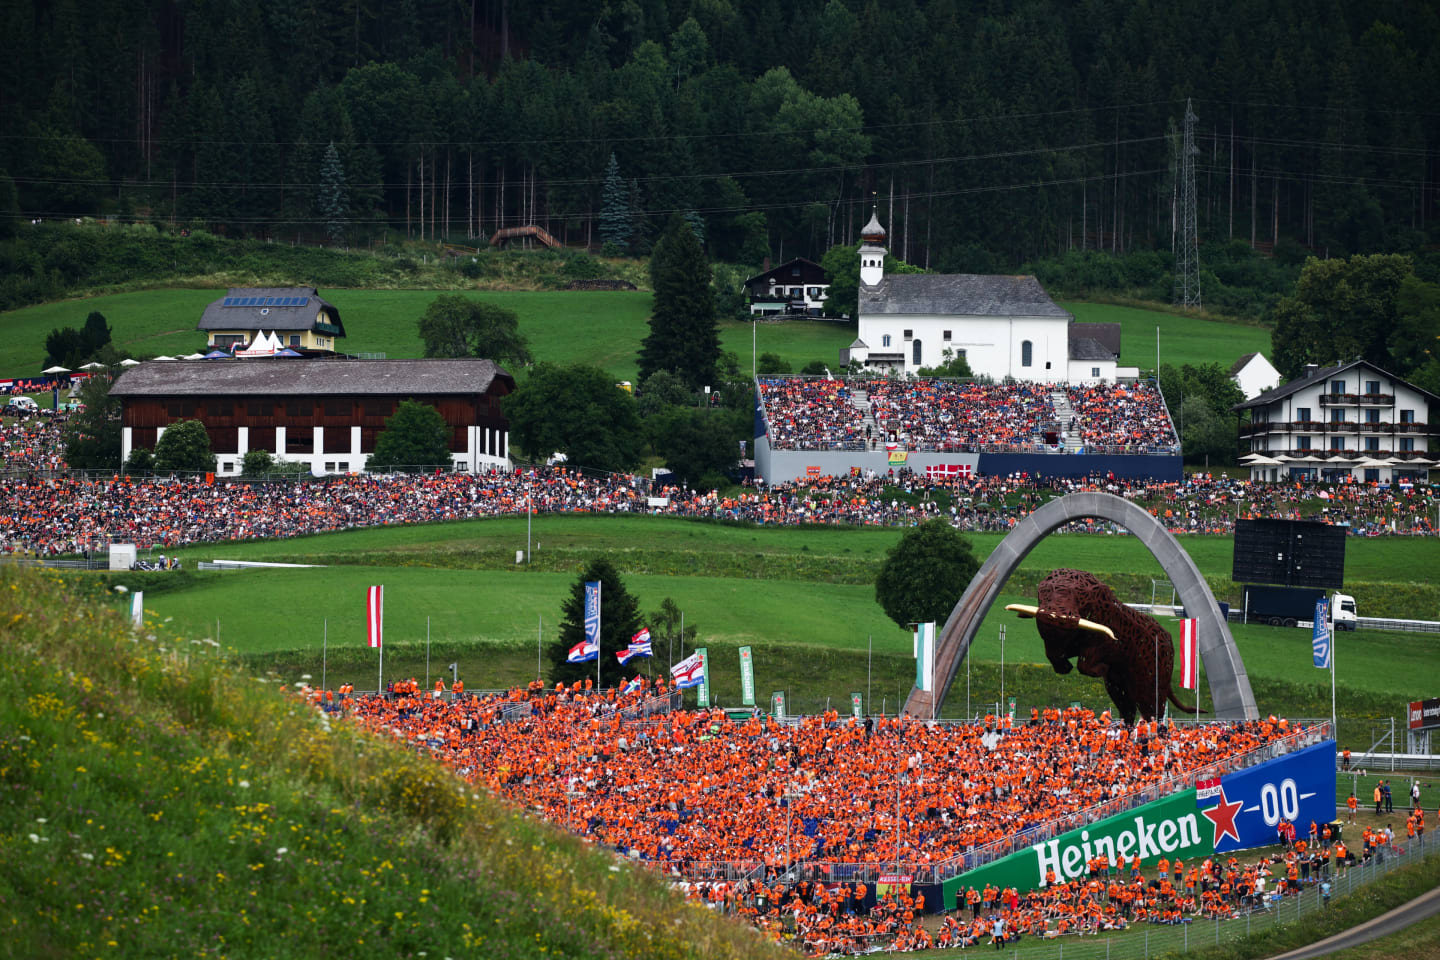 A view before the Formula 1 Austrian Grand Prix at Red Bull Ring in Spielberg, Austria on July 2,